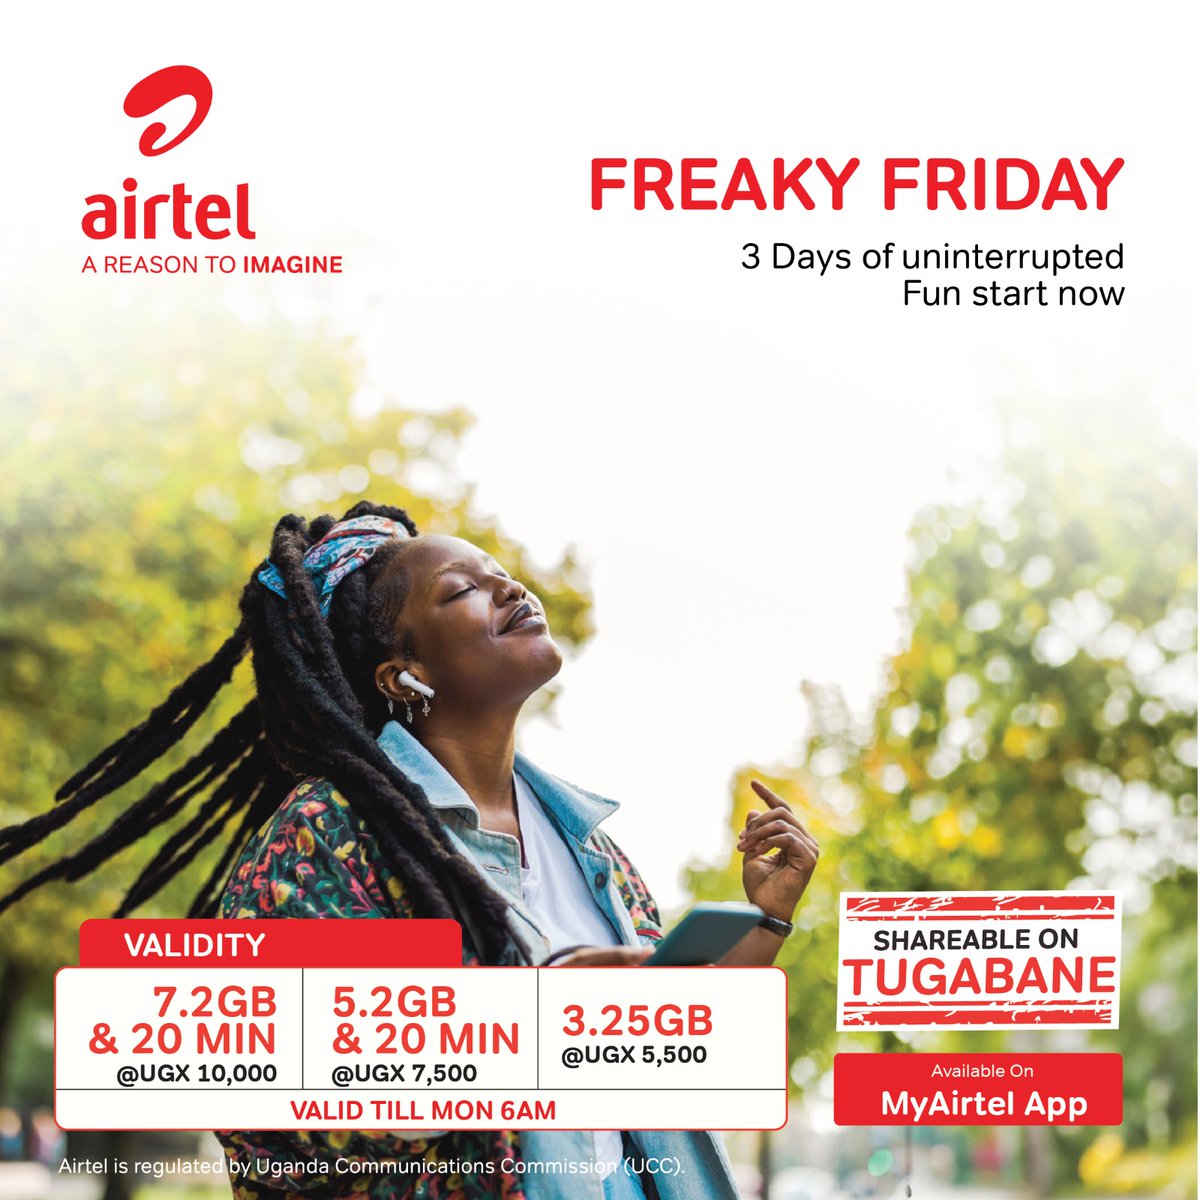 Friday’s always got better with amazing #FreakyFriday Bundles. Enjoy your Friday with it by dialing *100*0# or use MyAirtel app airtelafrica.onelink.me/cGyr/qgj4qeu2 to select your bundle